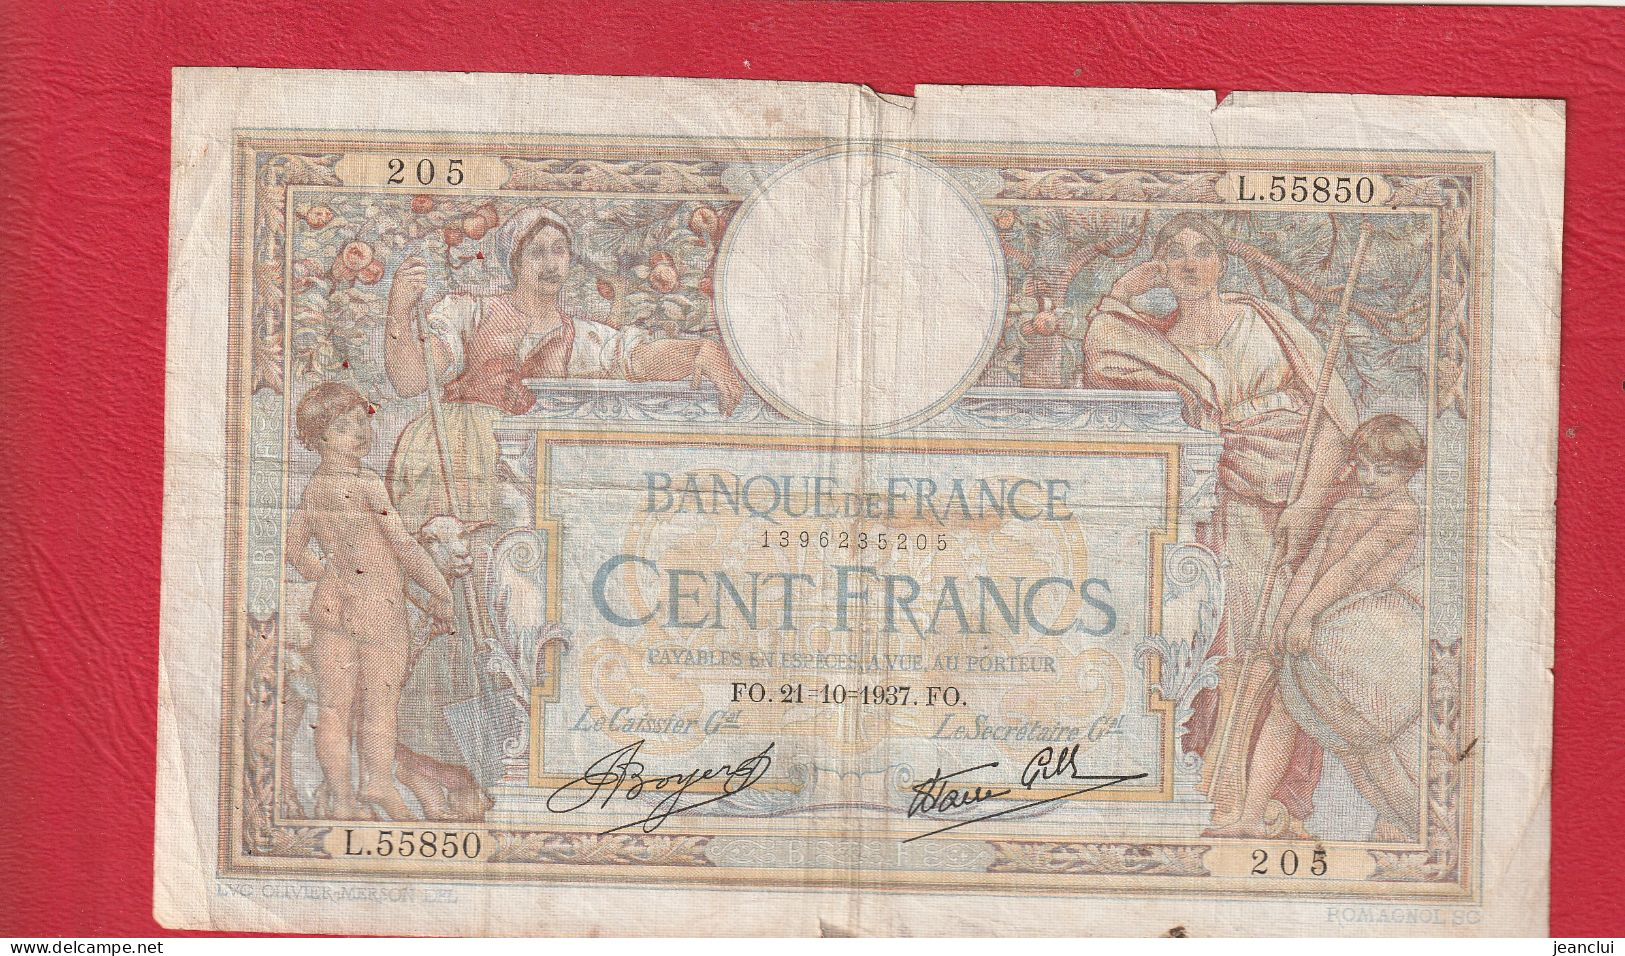 ** RARE **  100 ANCIENS FRANCS TYPE  LOM 02 . CAISSIER GENERAL **  21-10-1937 . SERIE L.55850  N° 205 .  BOYER-FAVRE GIL - 100 F 1908-1939 ''Luc Olivier Merson''